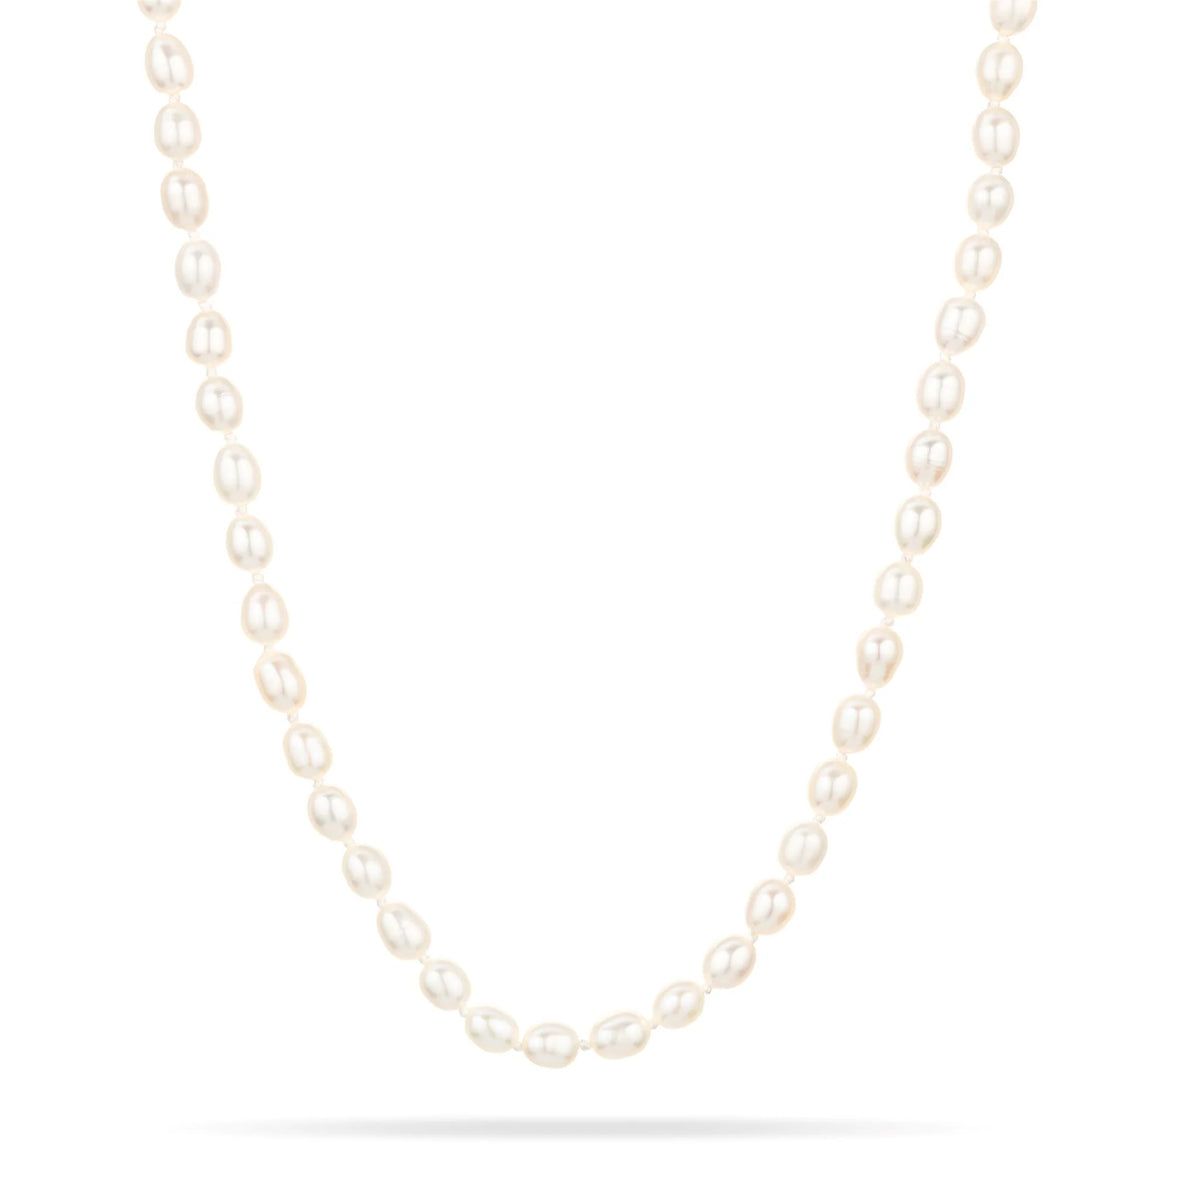 Chunky Seed Pearl Necklace | Milestones by Ashleigh Bergman